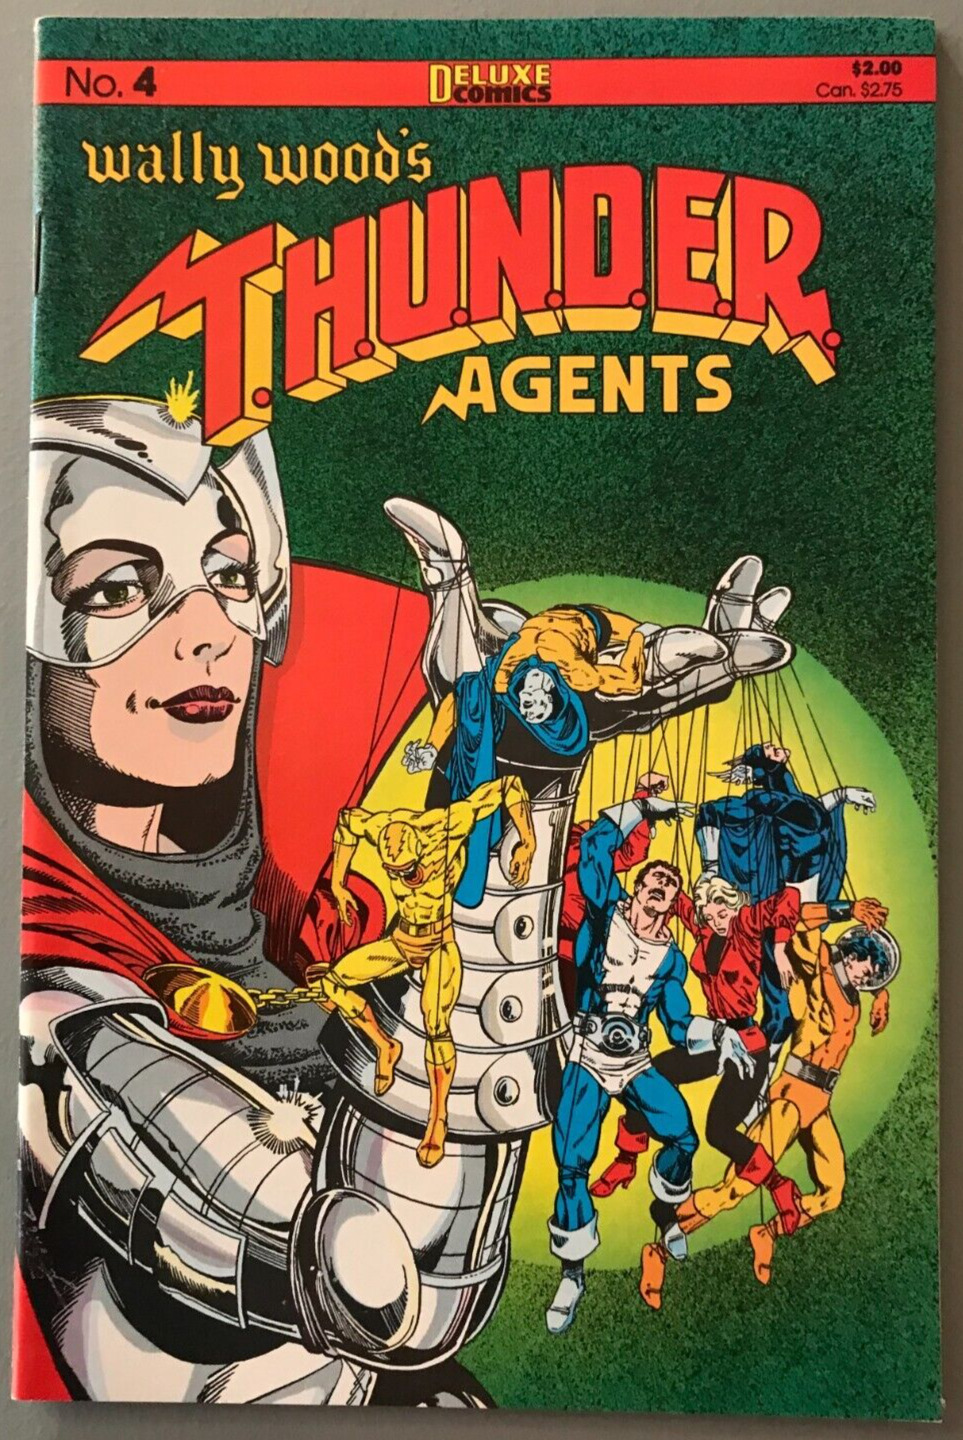 Wally Wood\'s Thunder Agents #4 By George Perez Ditko T.H.U.N.D.E.R. NM/M 1986